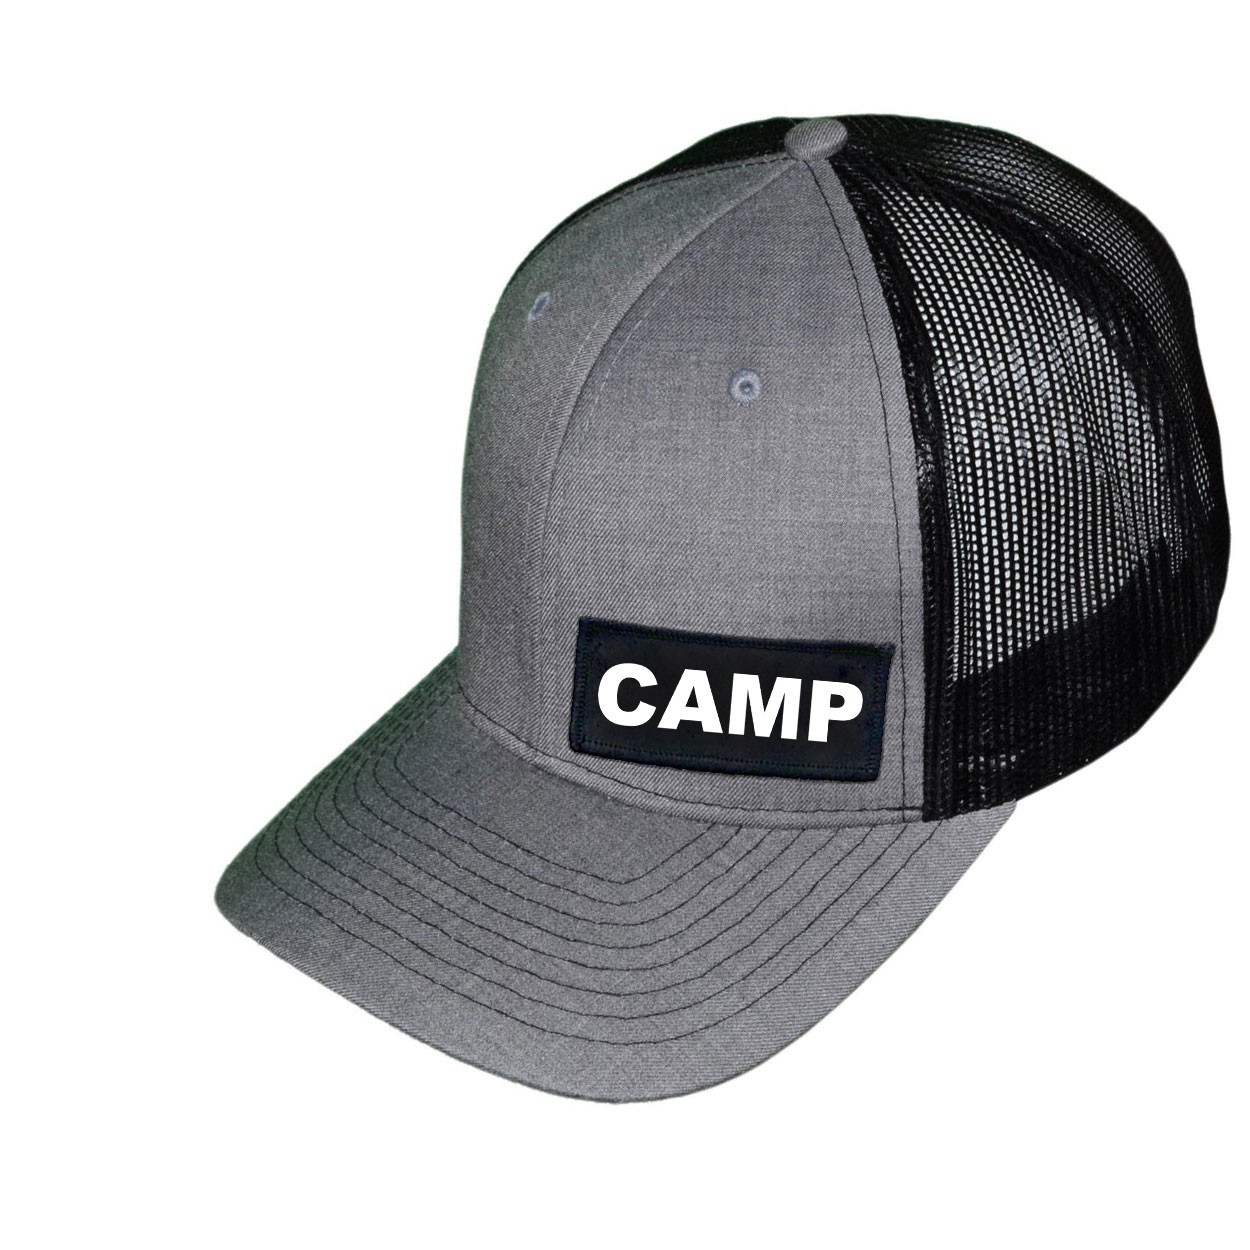 Camp Brand Logo Night Out Woven Patch Snapback Trucker Hat Heather Gray/Black (White Logo)